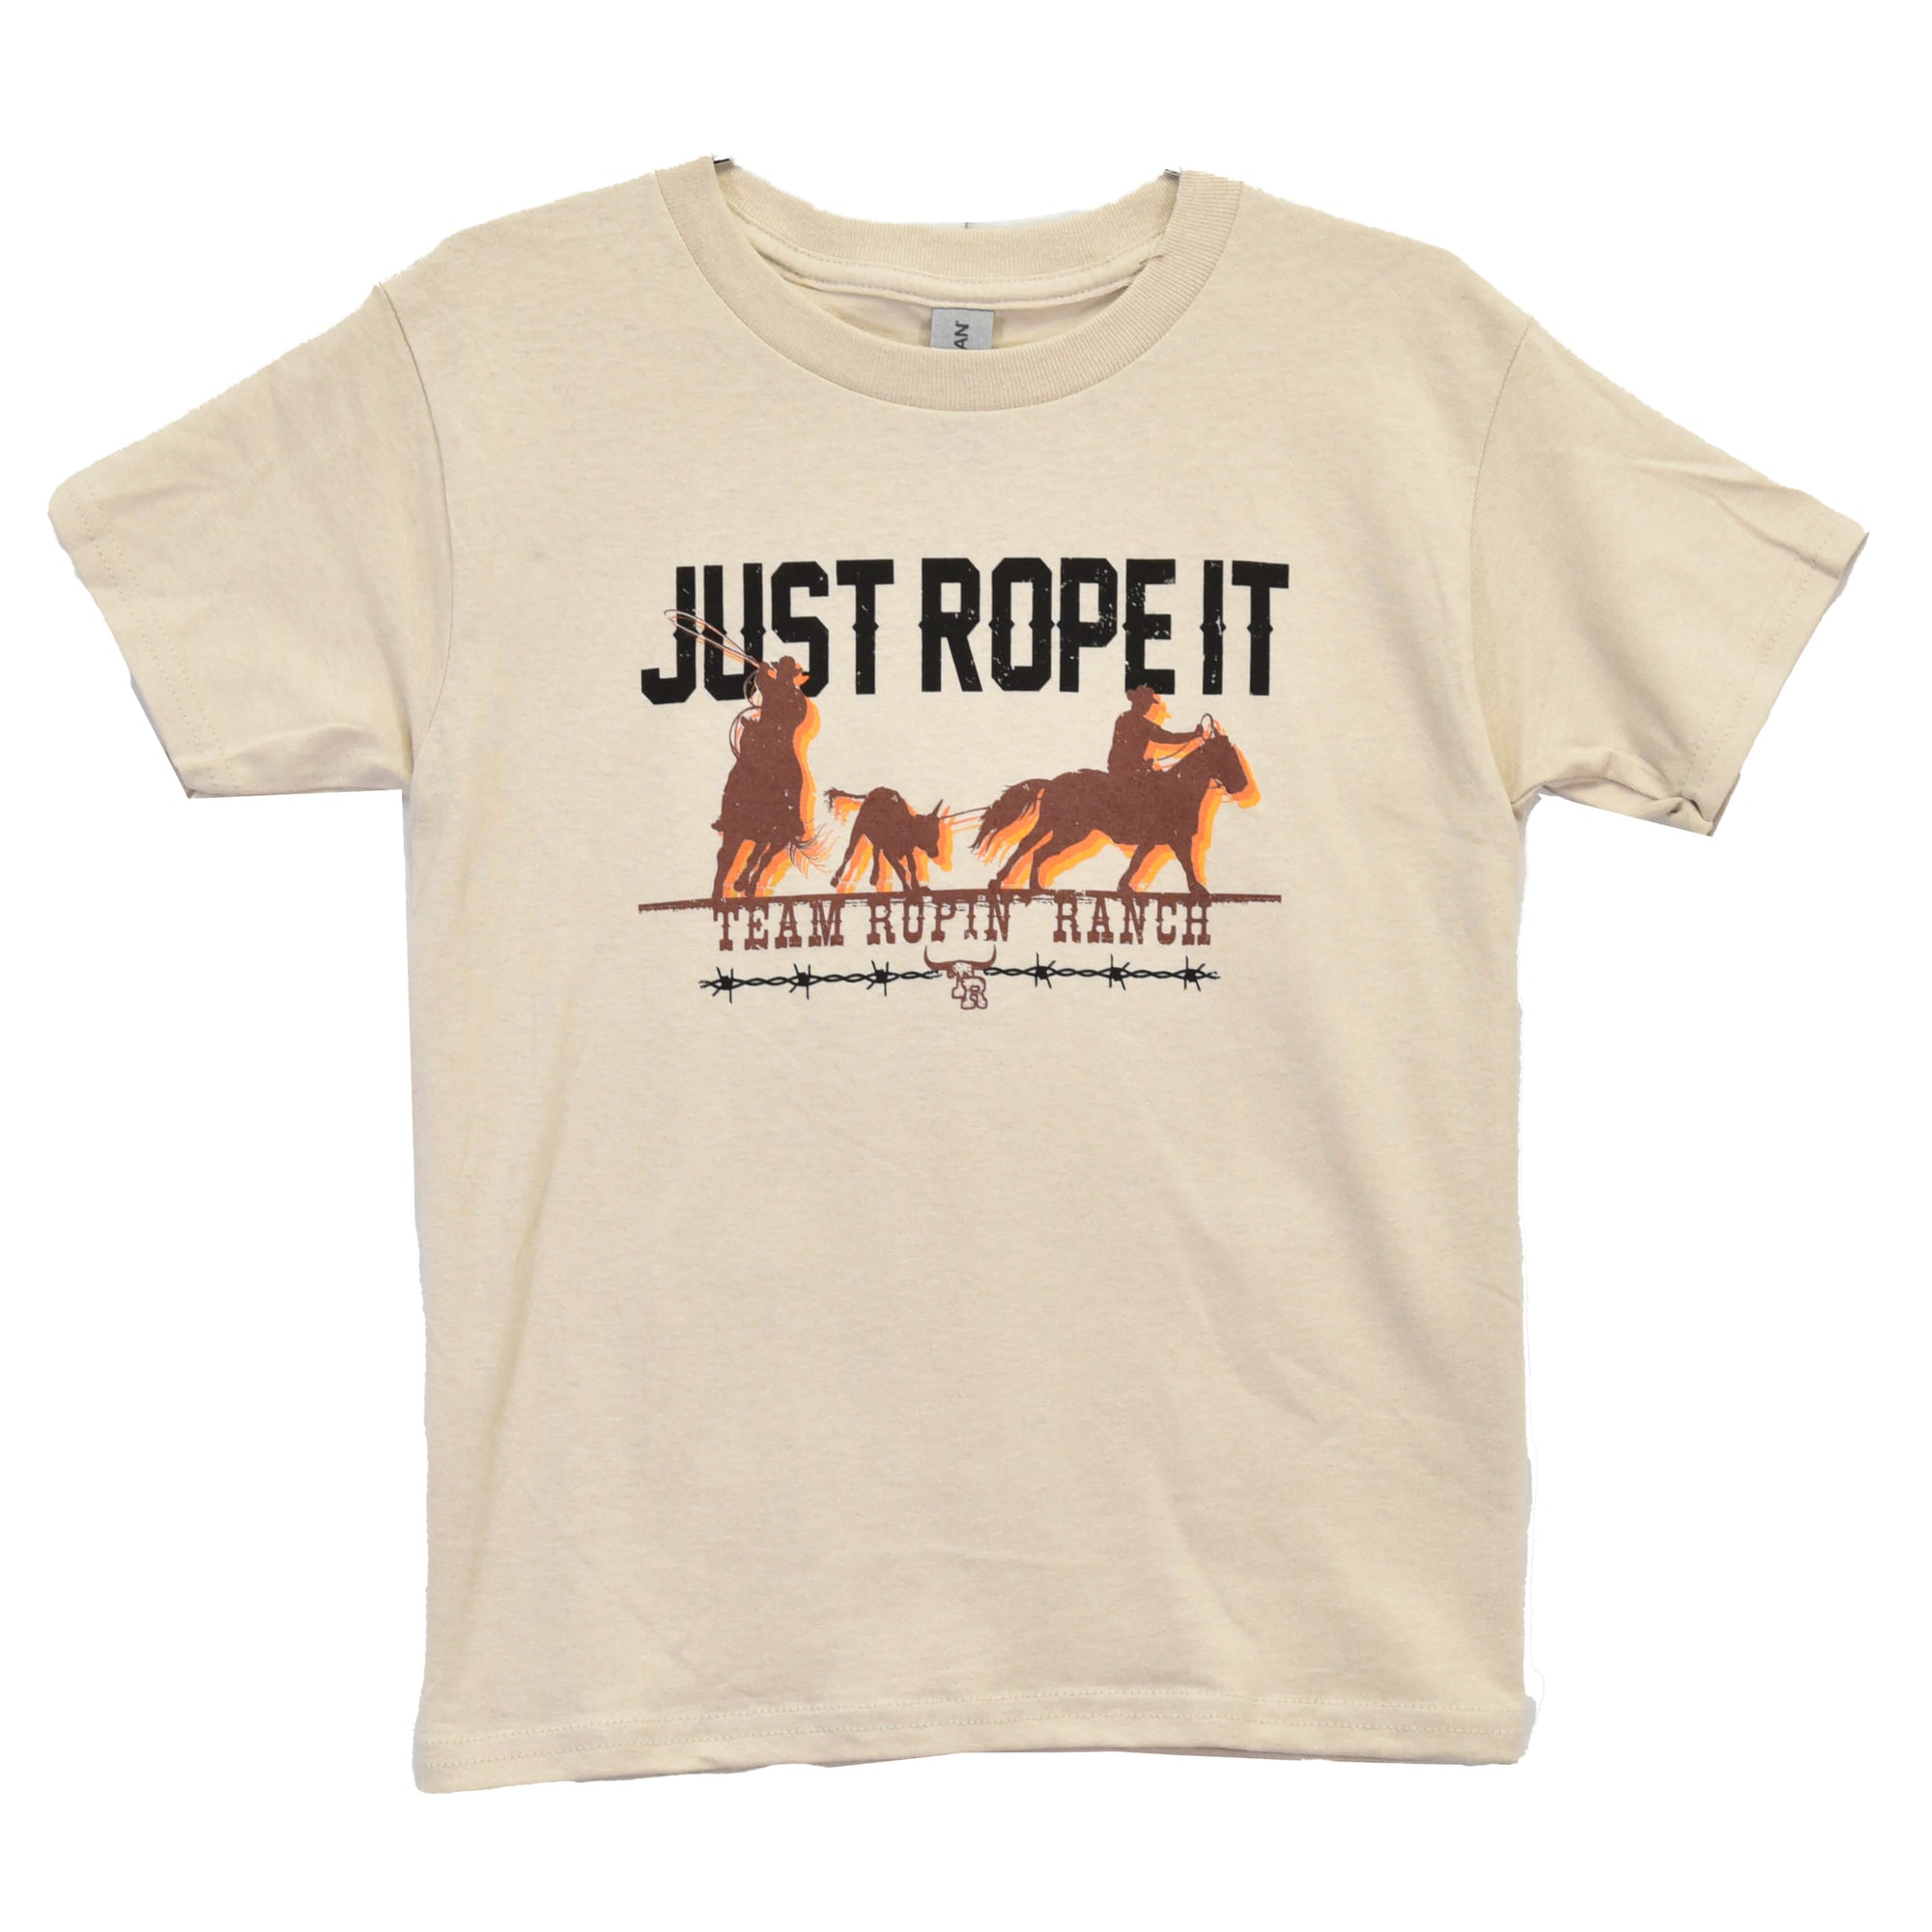 Infant/Toddler Boys Tan Just Rope It Short Sleeve T-Shirt from Cowboy Hardware